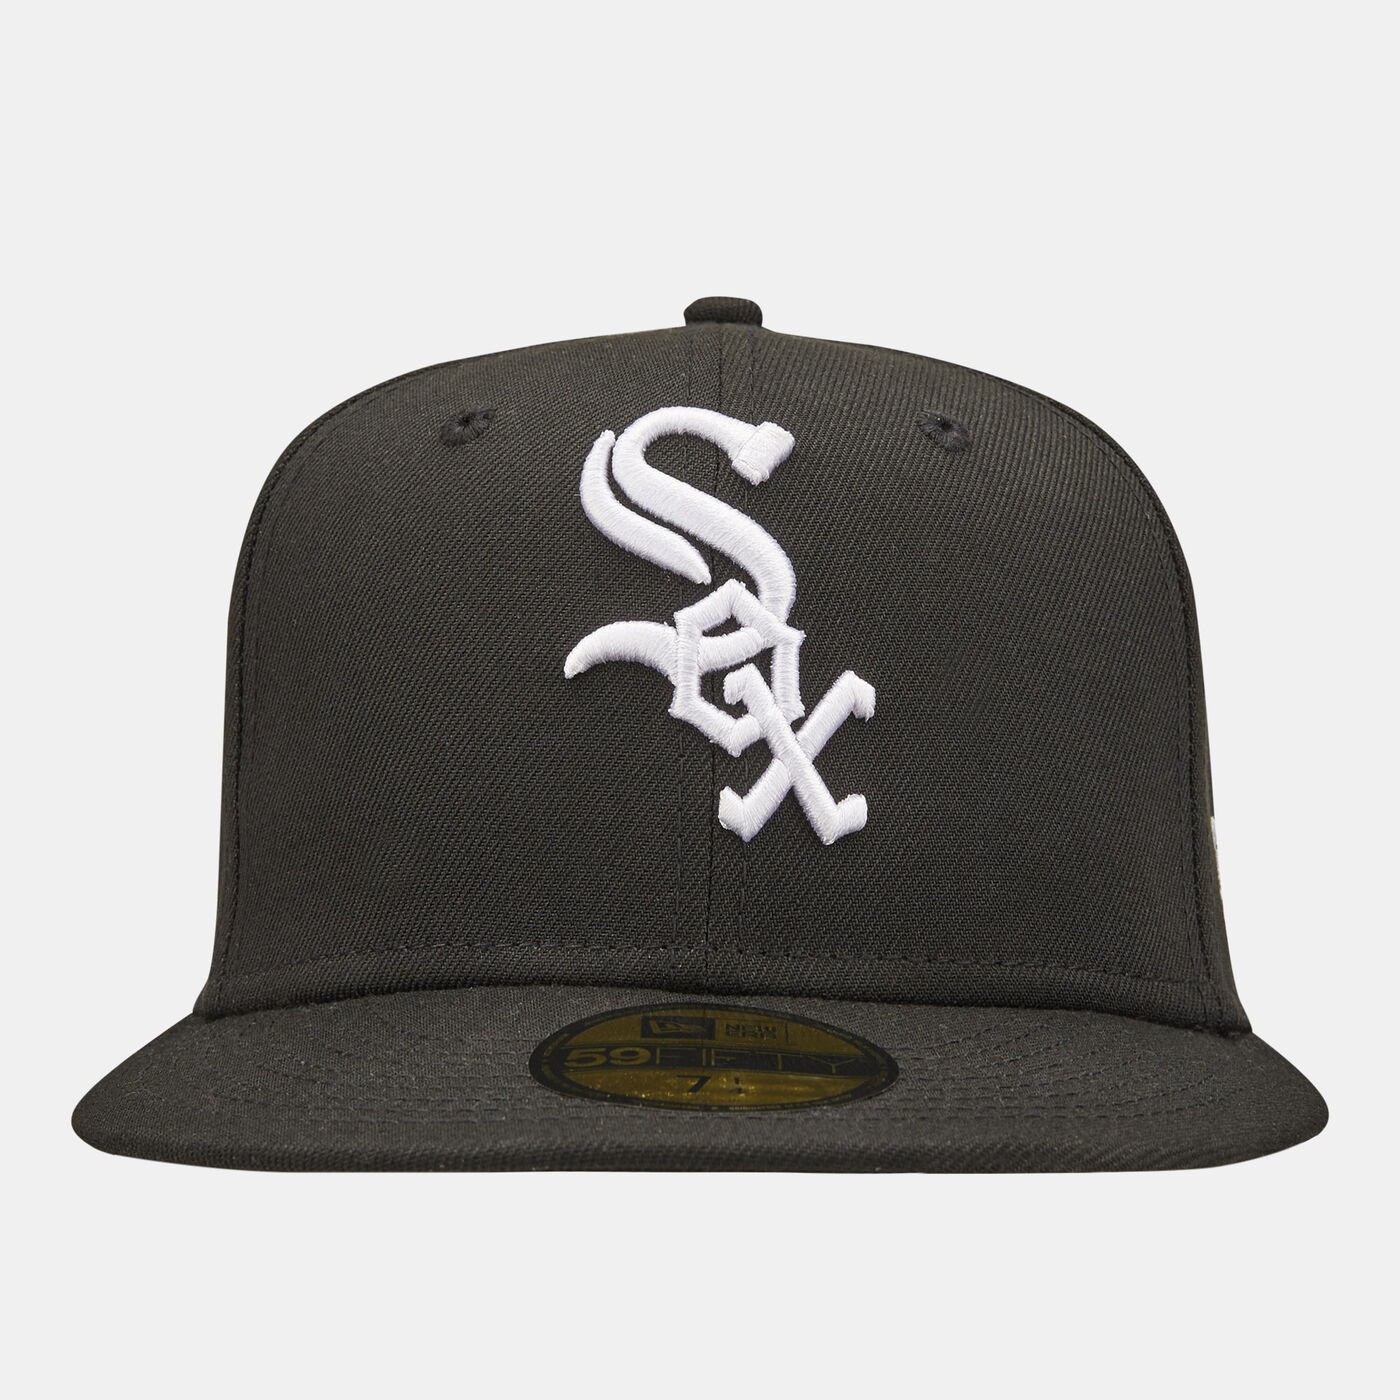 Men's Chicago White Sox Authentic On Field Game 59FIFTY Cap